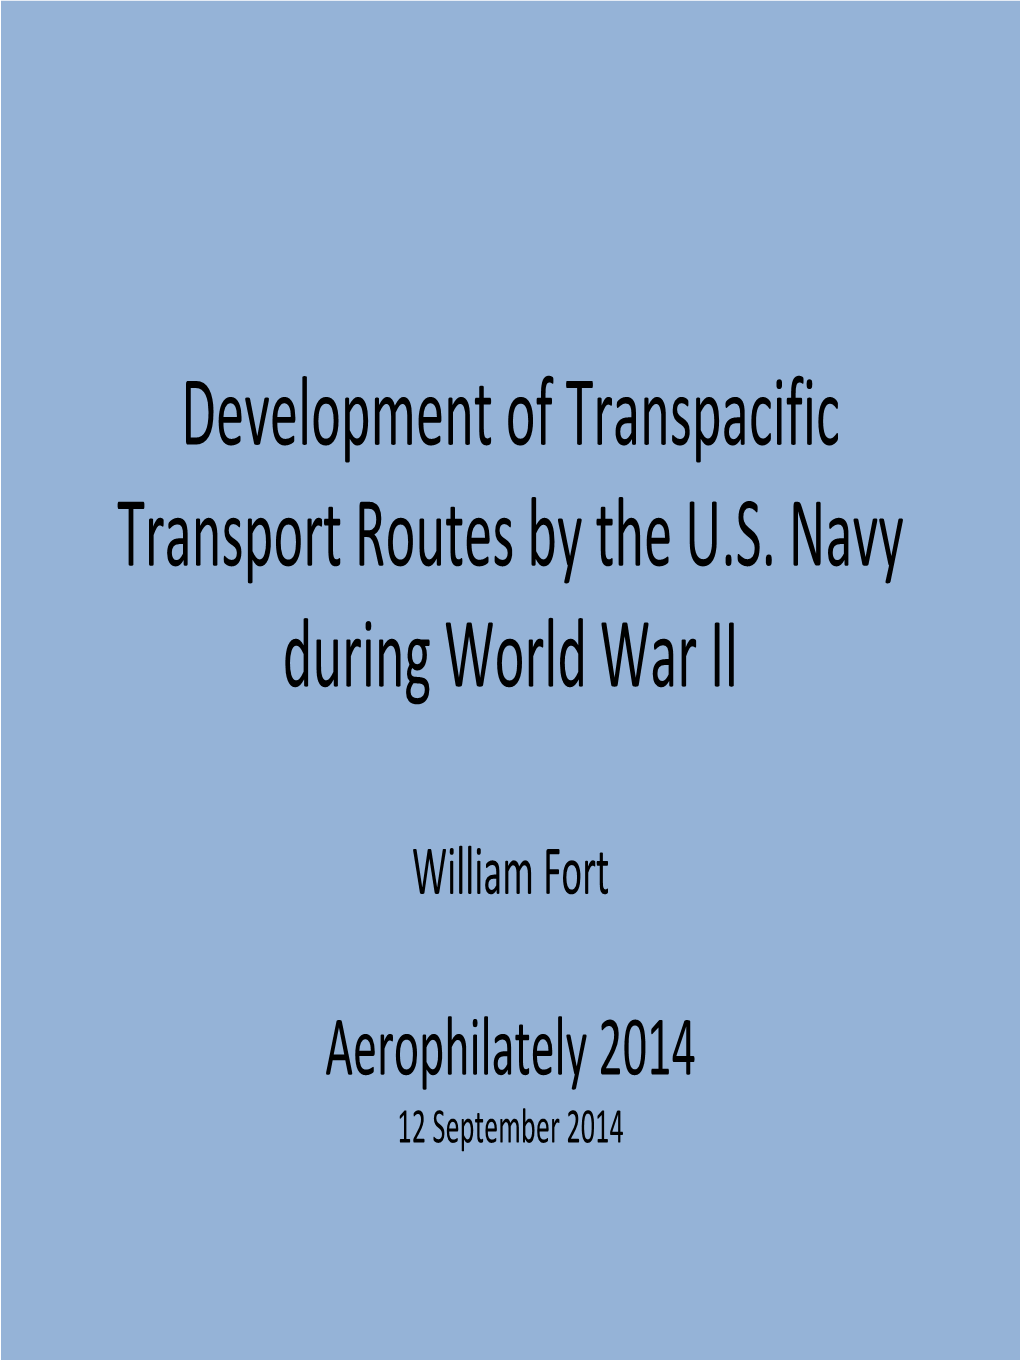 Development of Transpacific Transport Routes by the U.S. Navy During World War II